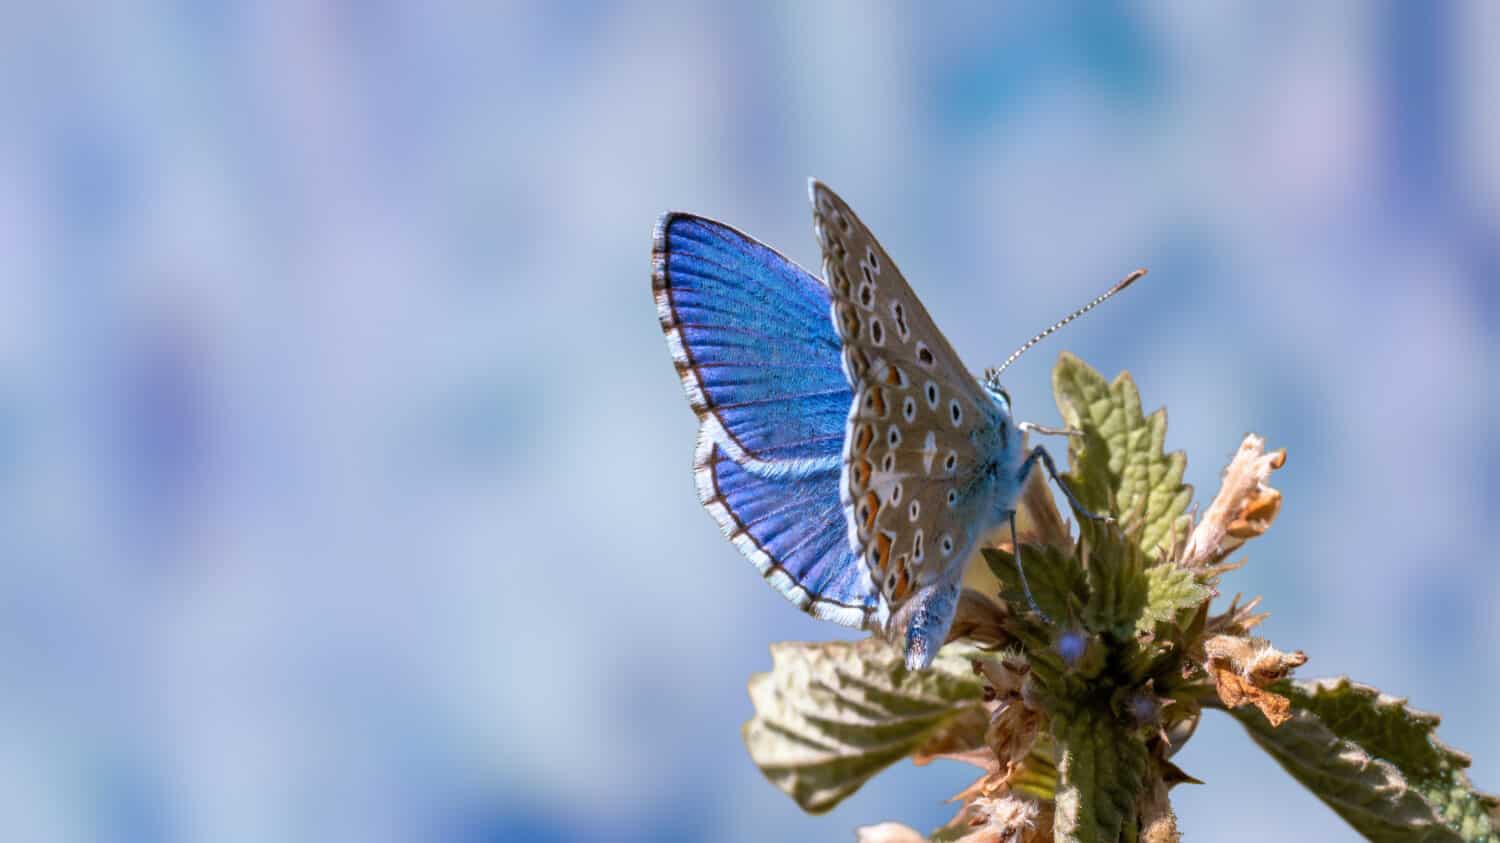 Nature background concept. One Adonis blue butterfly on a wild meadow flower ready to fly close up macro. Selective focus with blue blurred background. Beautiful summer meadow wallpaper. One of the rarest butterflies fluttering around England. 